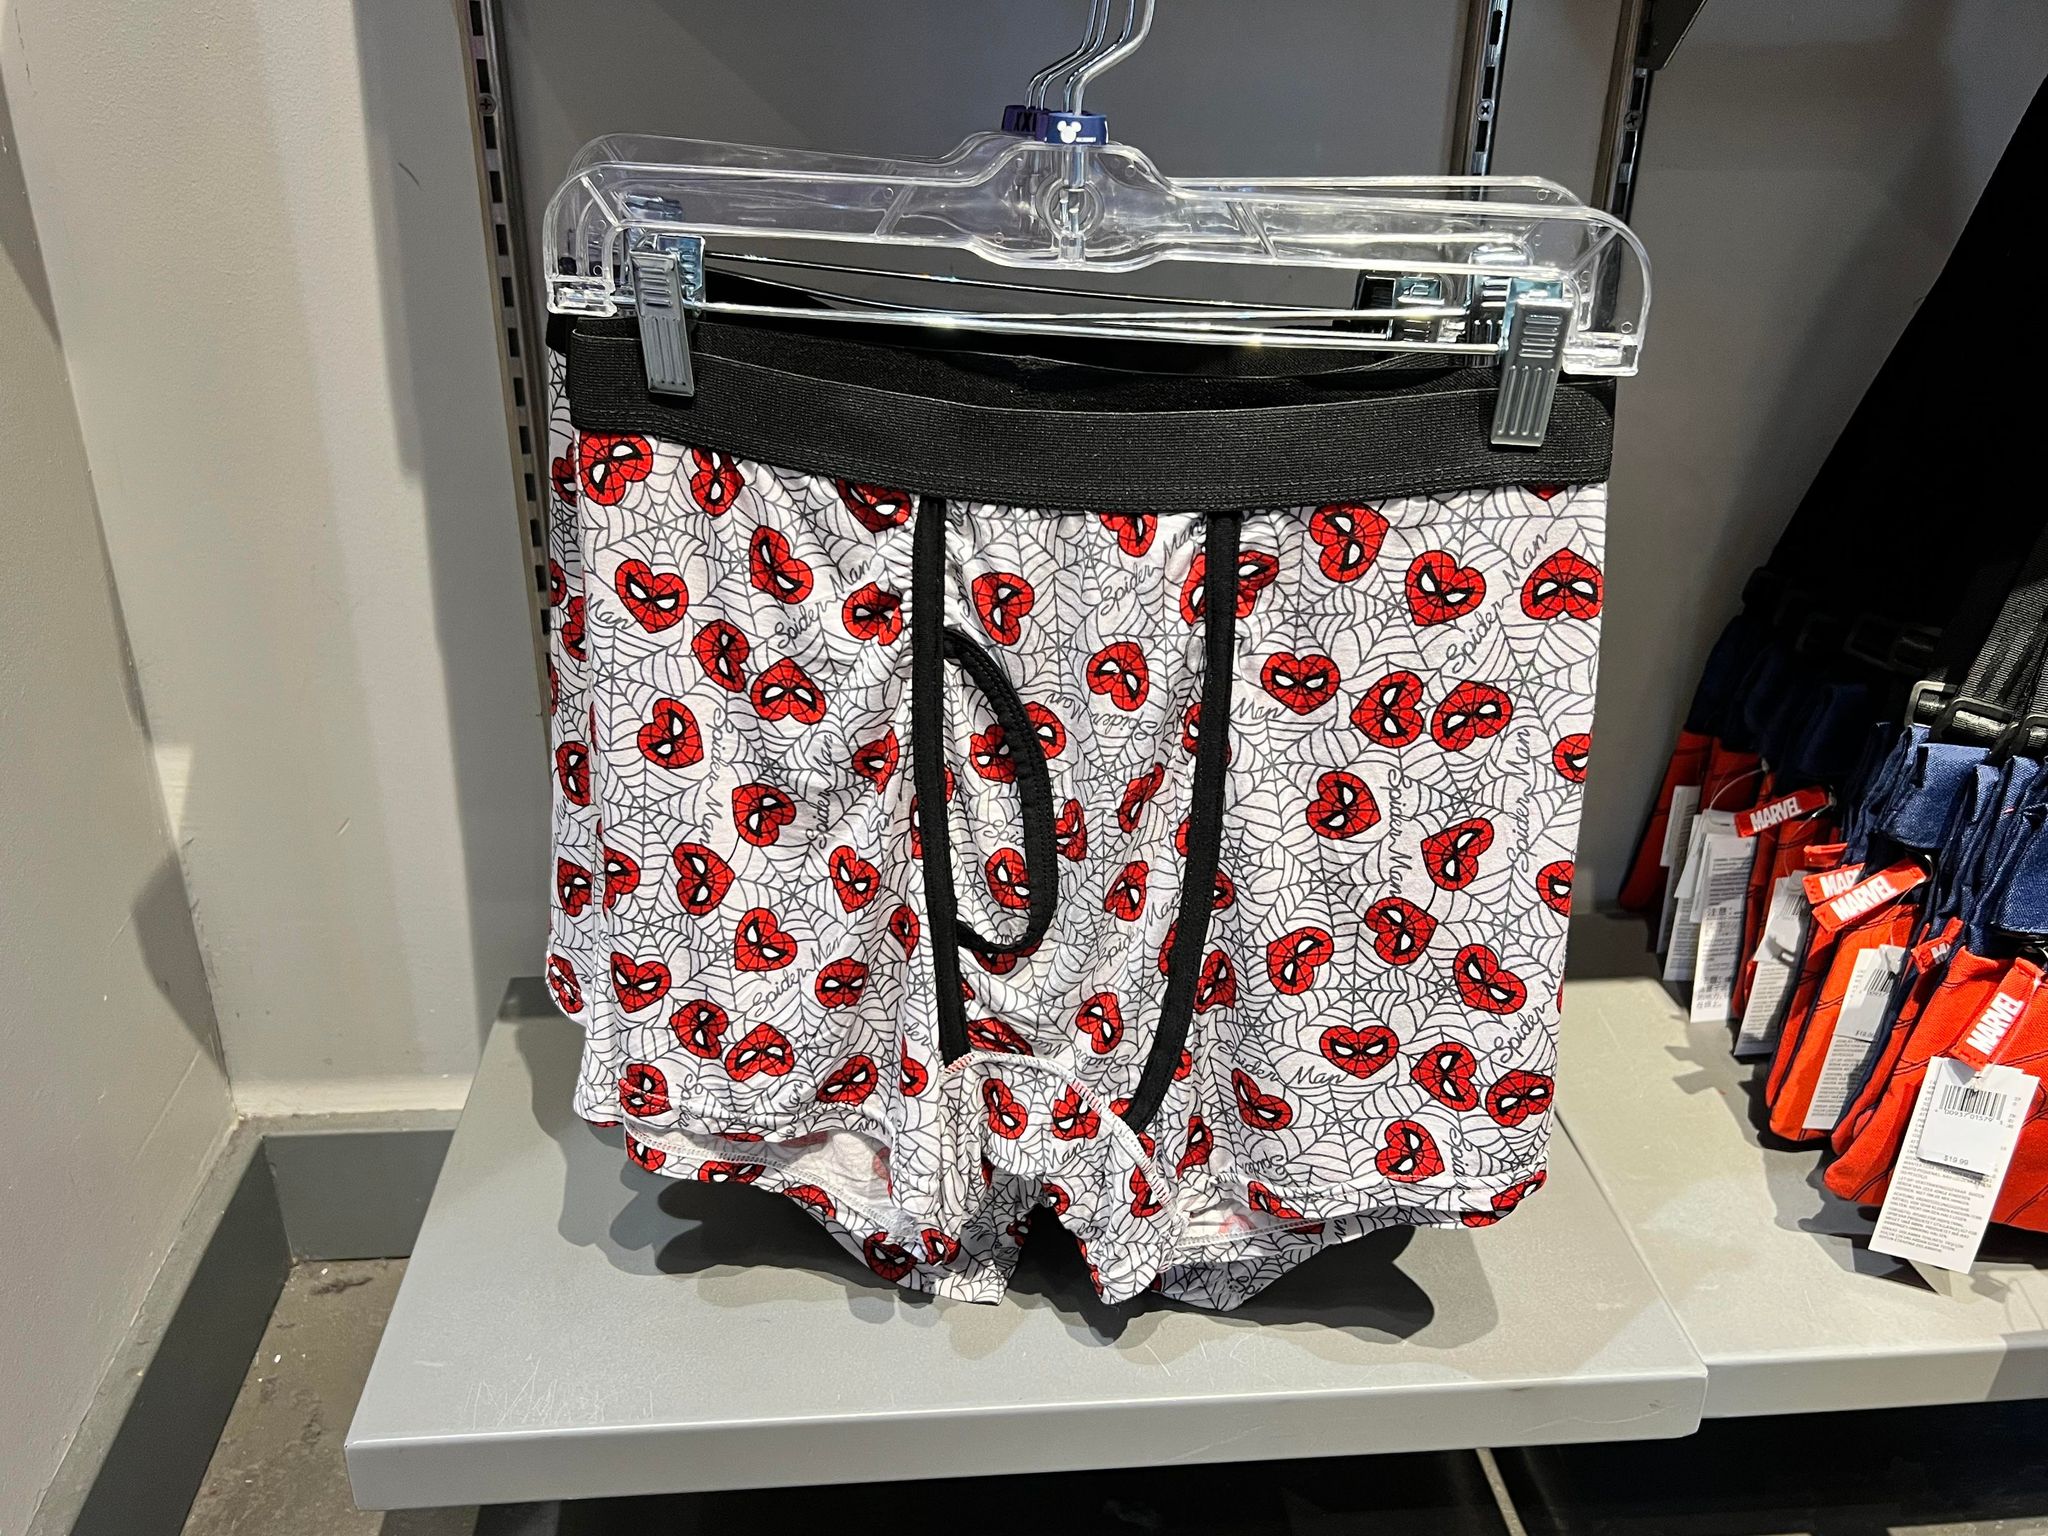 New Spider-Man Love Heart Boxers Swing into Disney Springs, Just